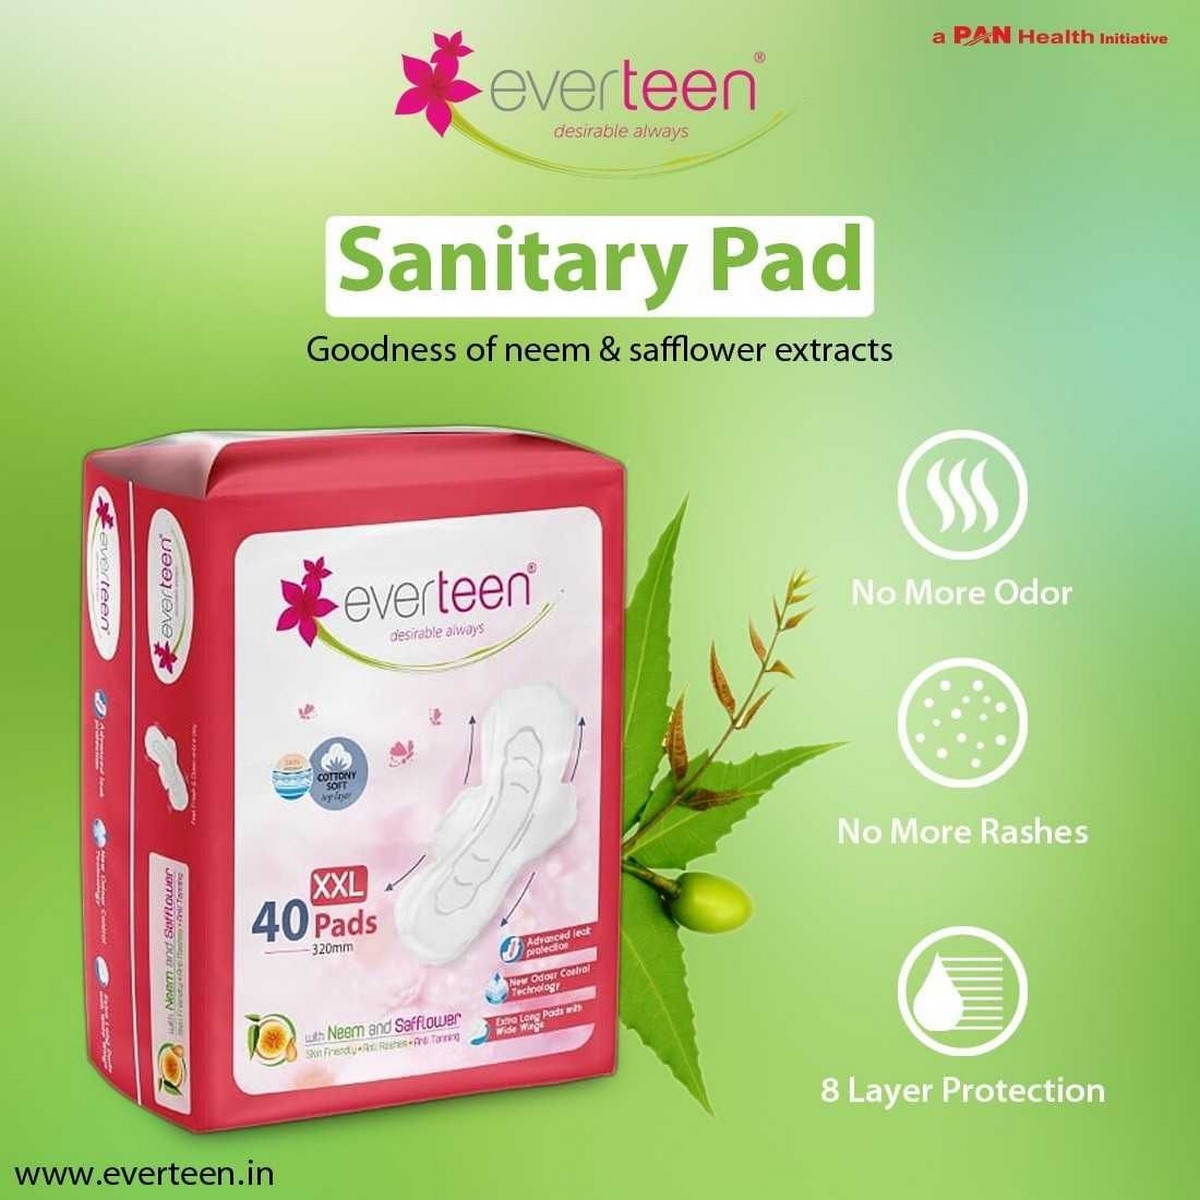 Everteen XXL Sanitary Napkin Pads with Cottony Soft Top Layer 40 pads 320 mm  everteen XXL Sanitary Napkin Pads with Cottony Soft Top Layer for Women Enriched with Neem and Safflower 1 Pack 40 Pads 320mm3 1